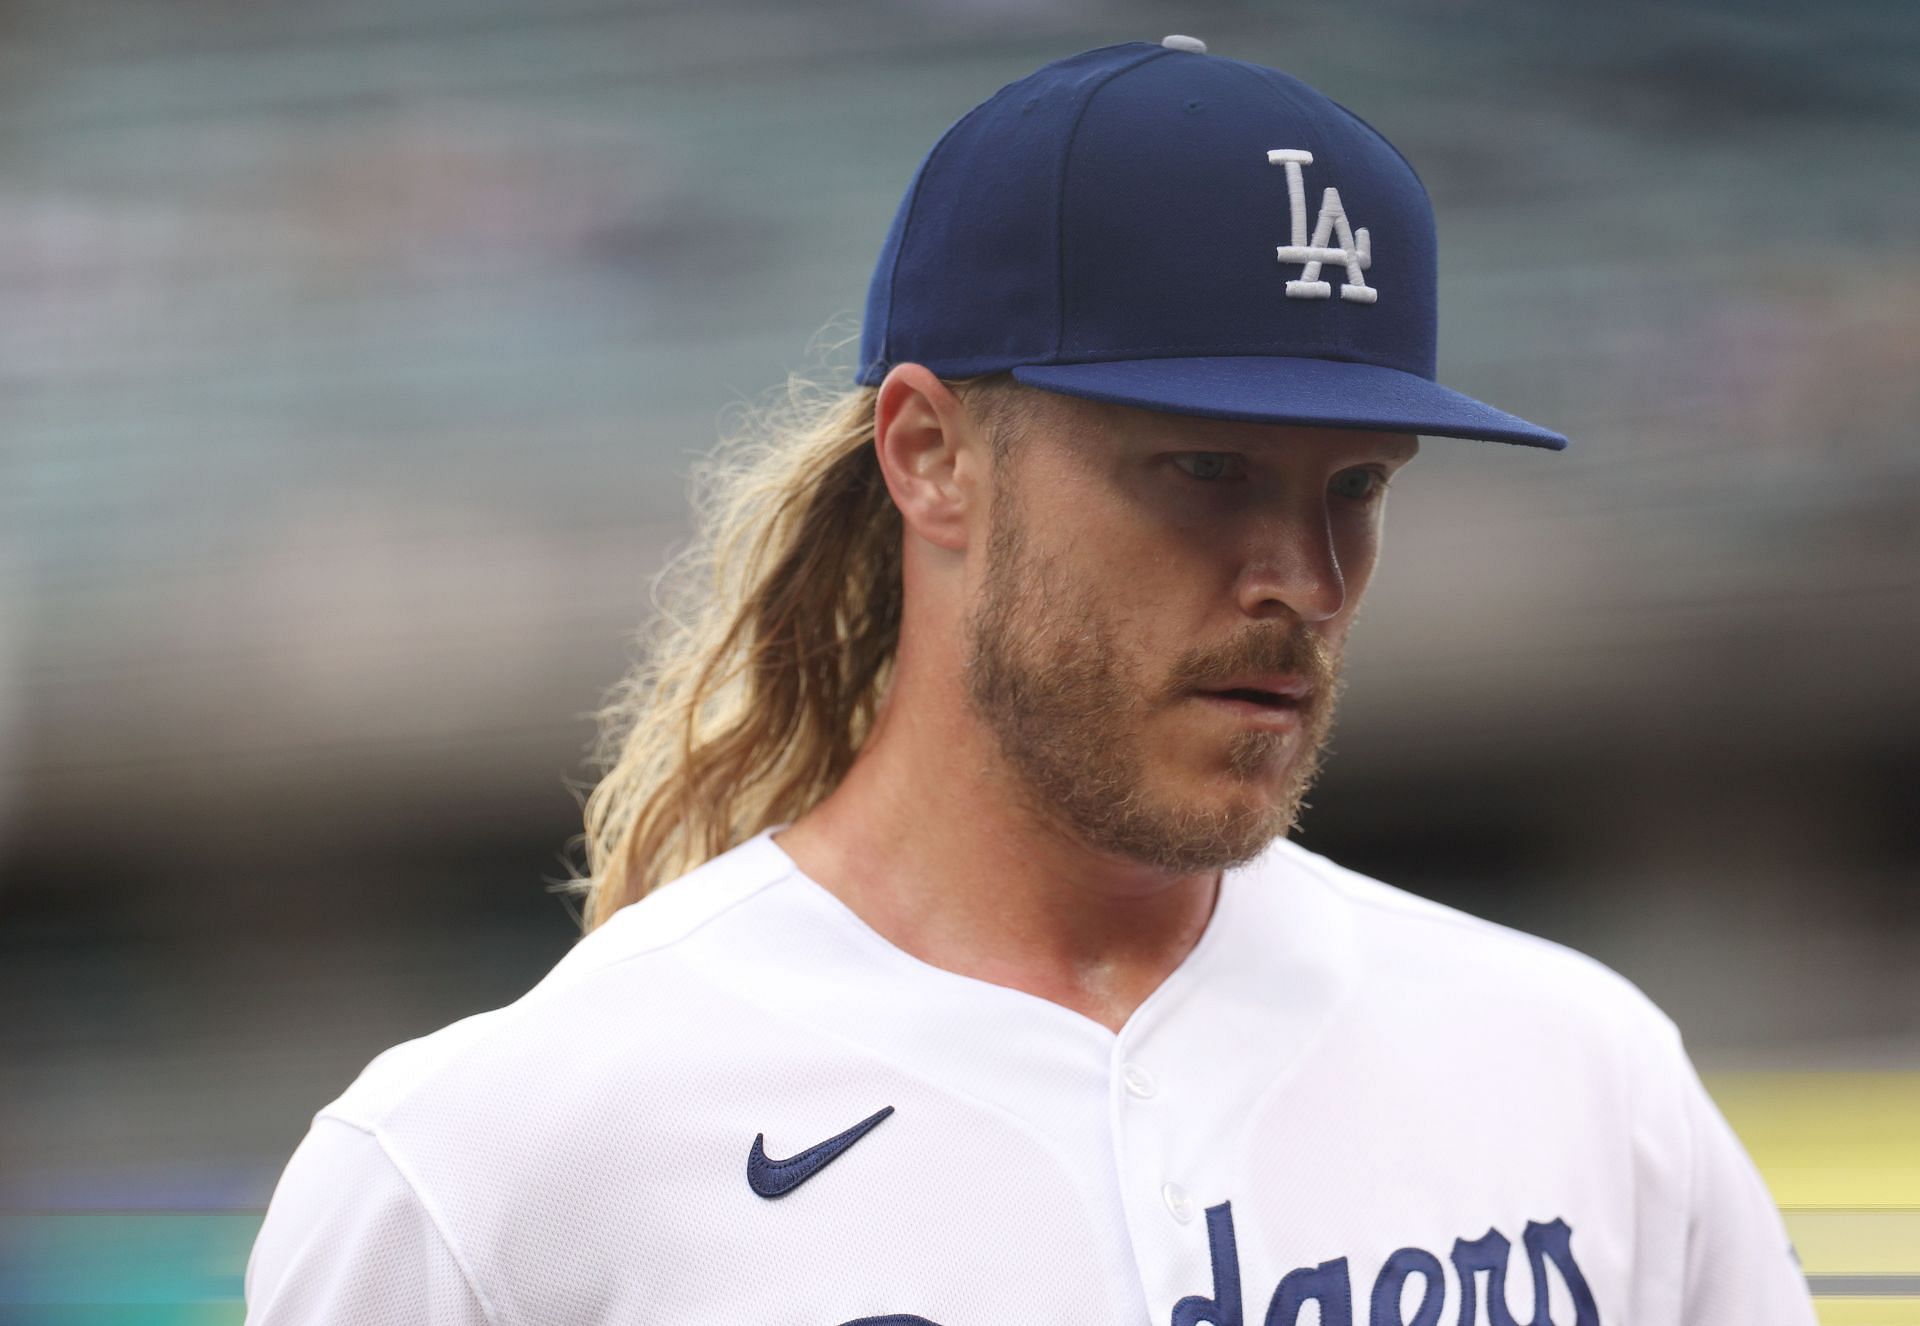 Noah Syndergaard of the Los Angeles Dodgers reacts as he comes to the dugout against the Washington Nationals at Dodger Stadium